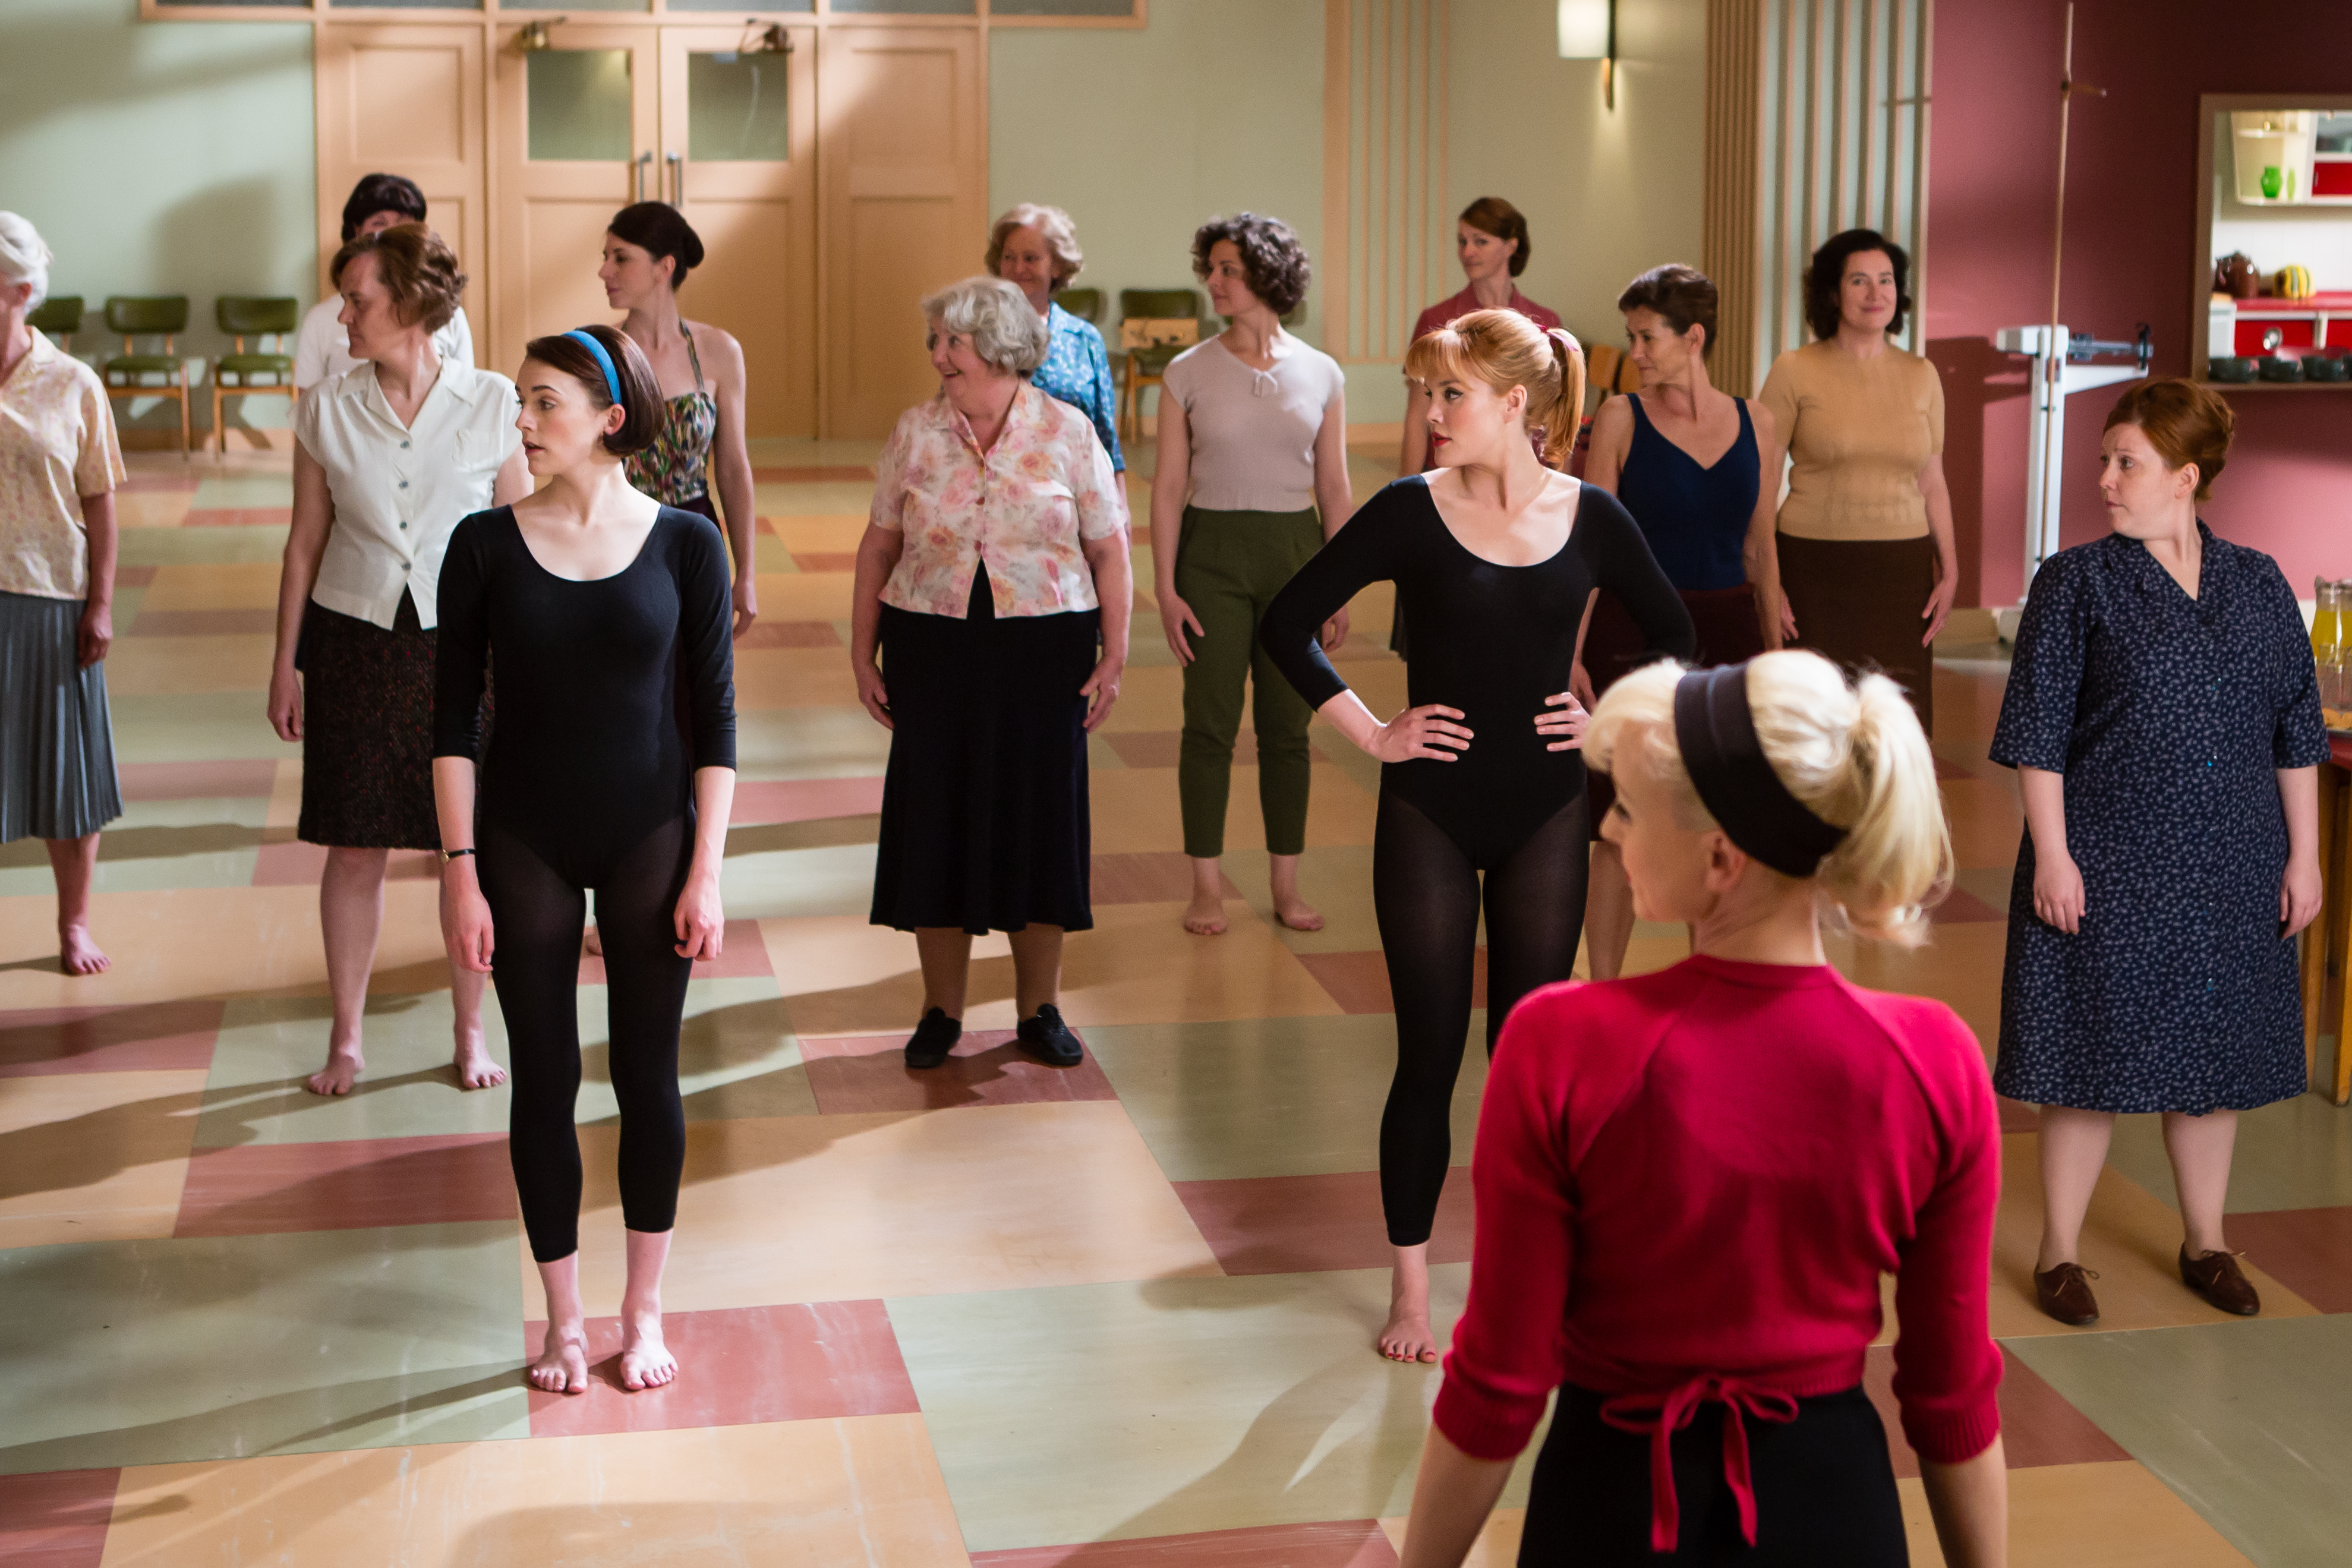 Call the Midwife_S05_EP01_EMBARGOED UNTIL JANUARY 13TH 2016